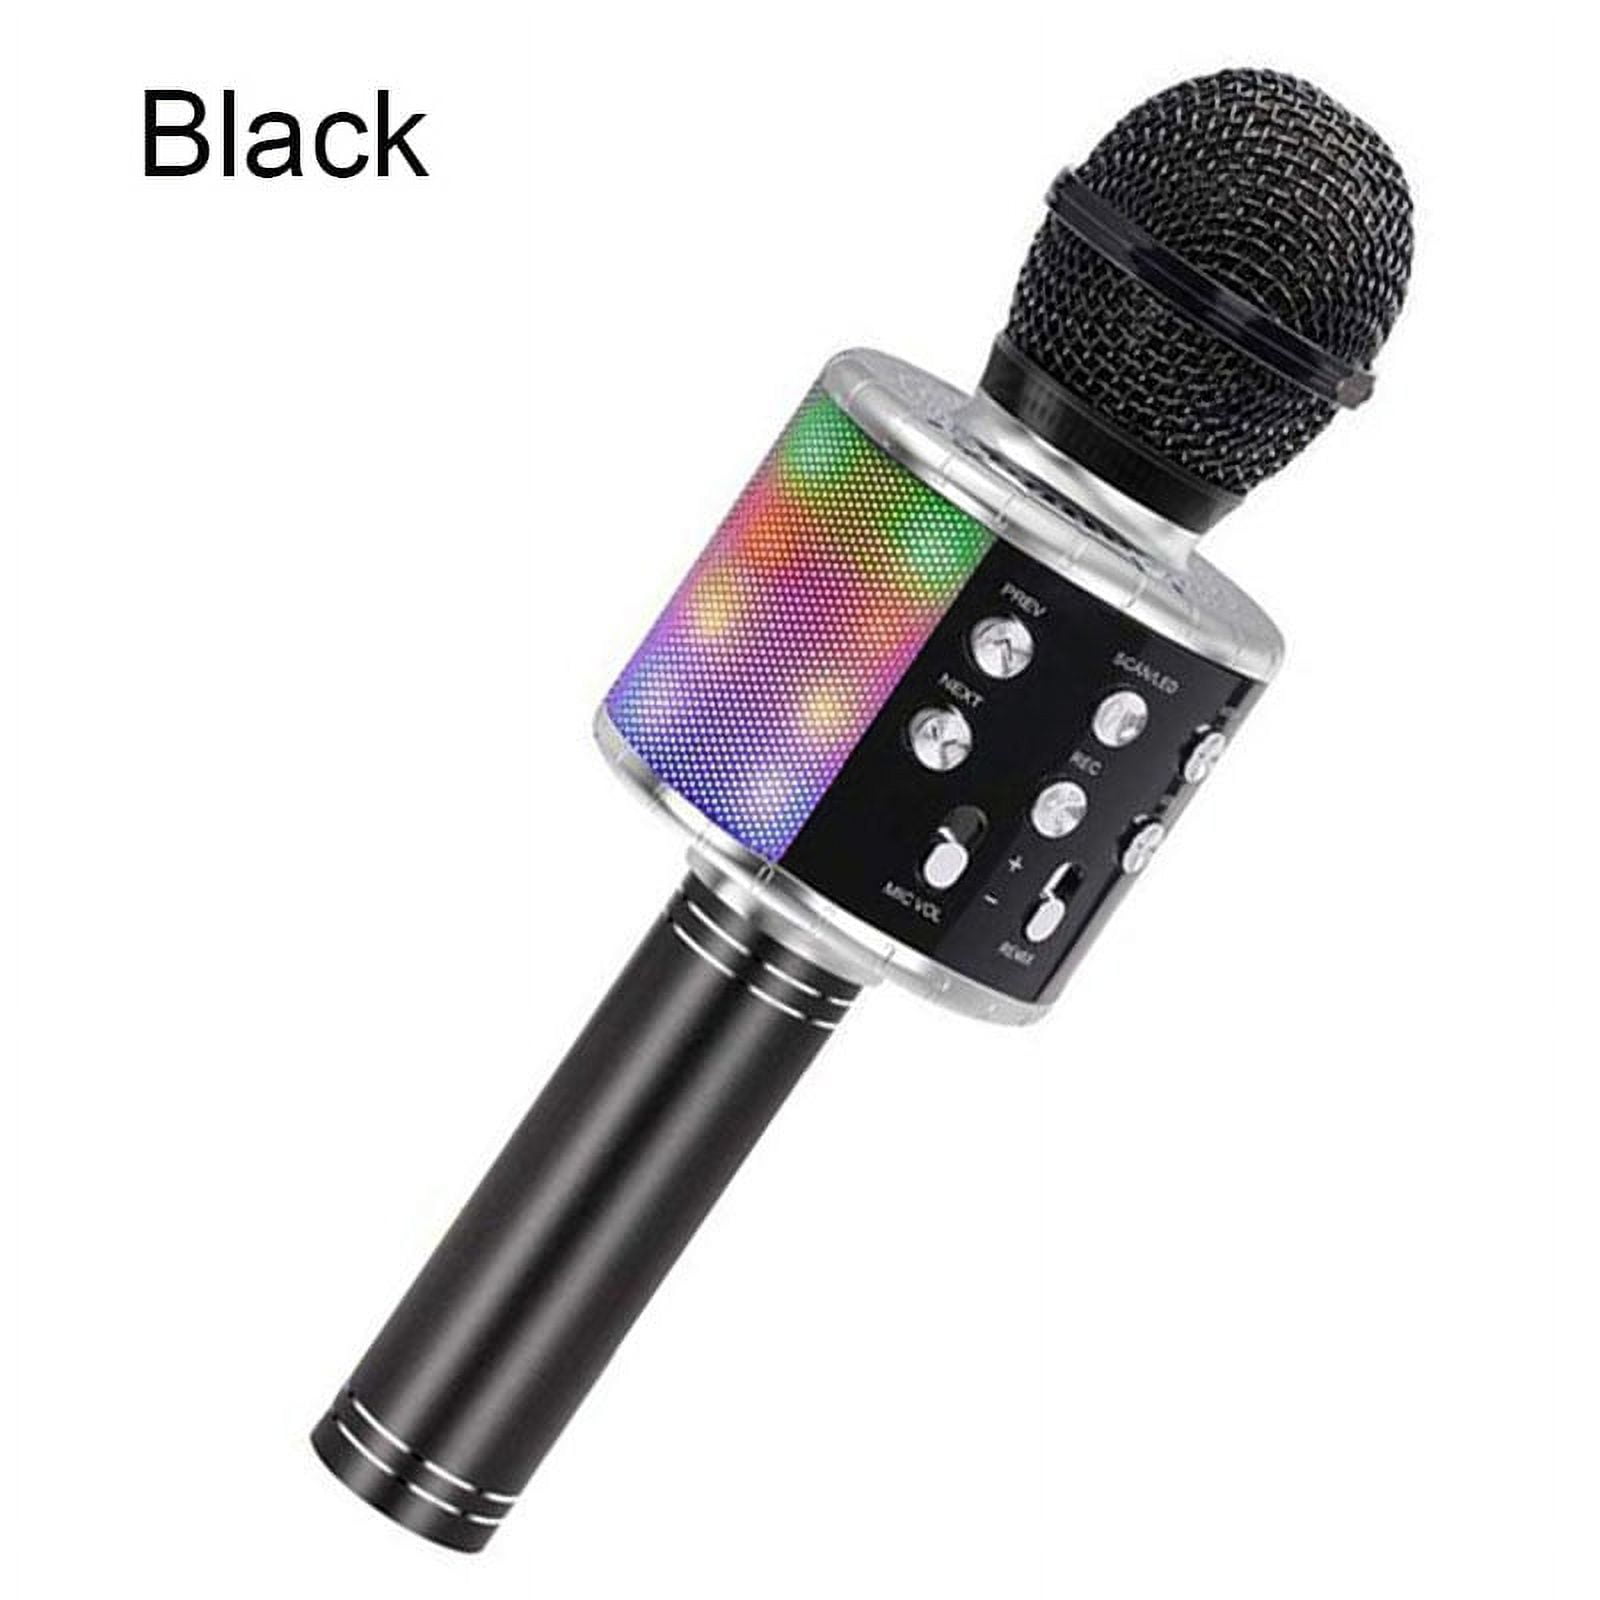 Karaoke Bluetooth Microphone with Wireless Party Toys for Kids Birthday  Present for Kids,Gifts for 3-12 Year Old Girls Boys, Black